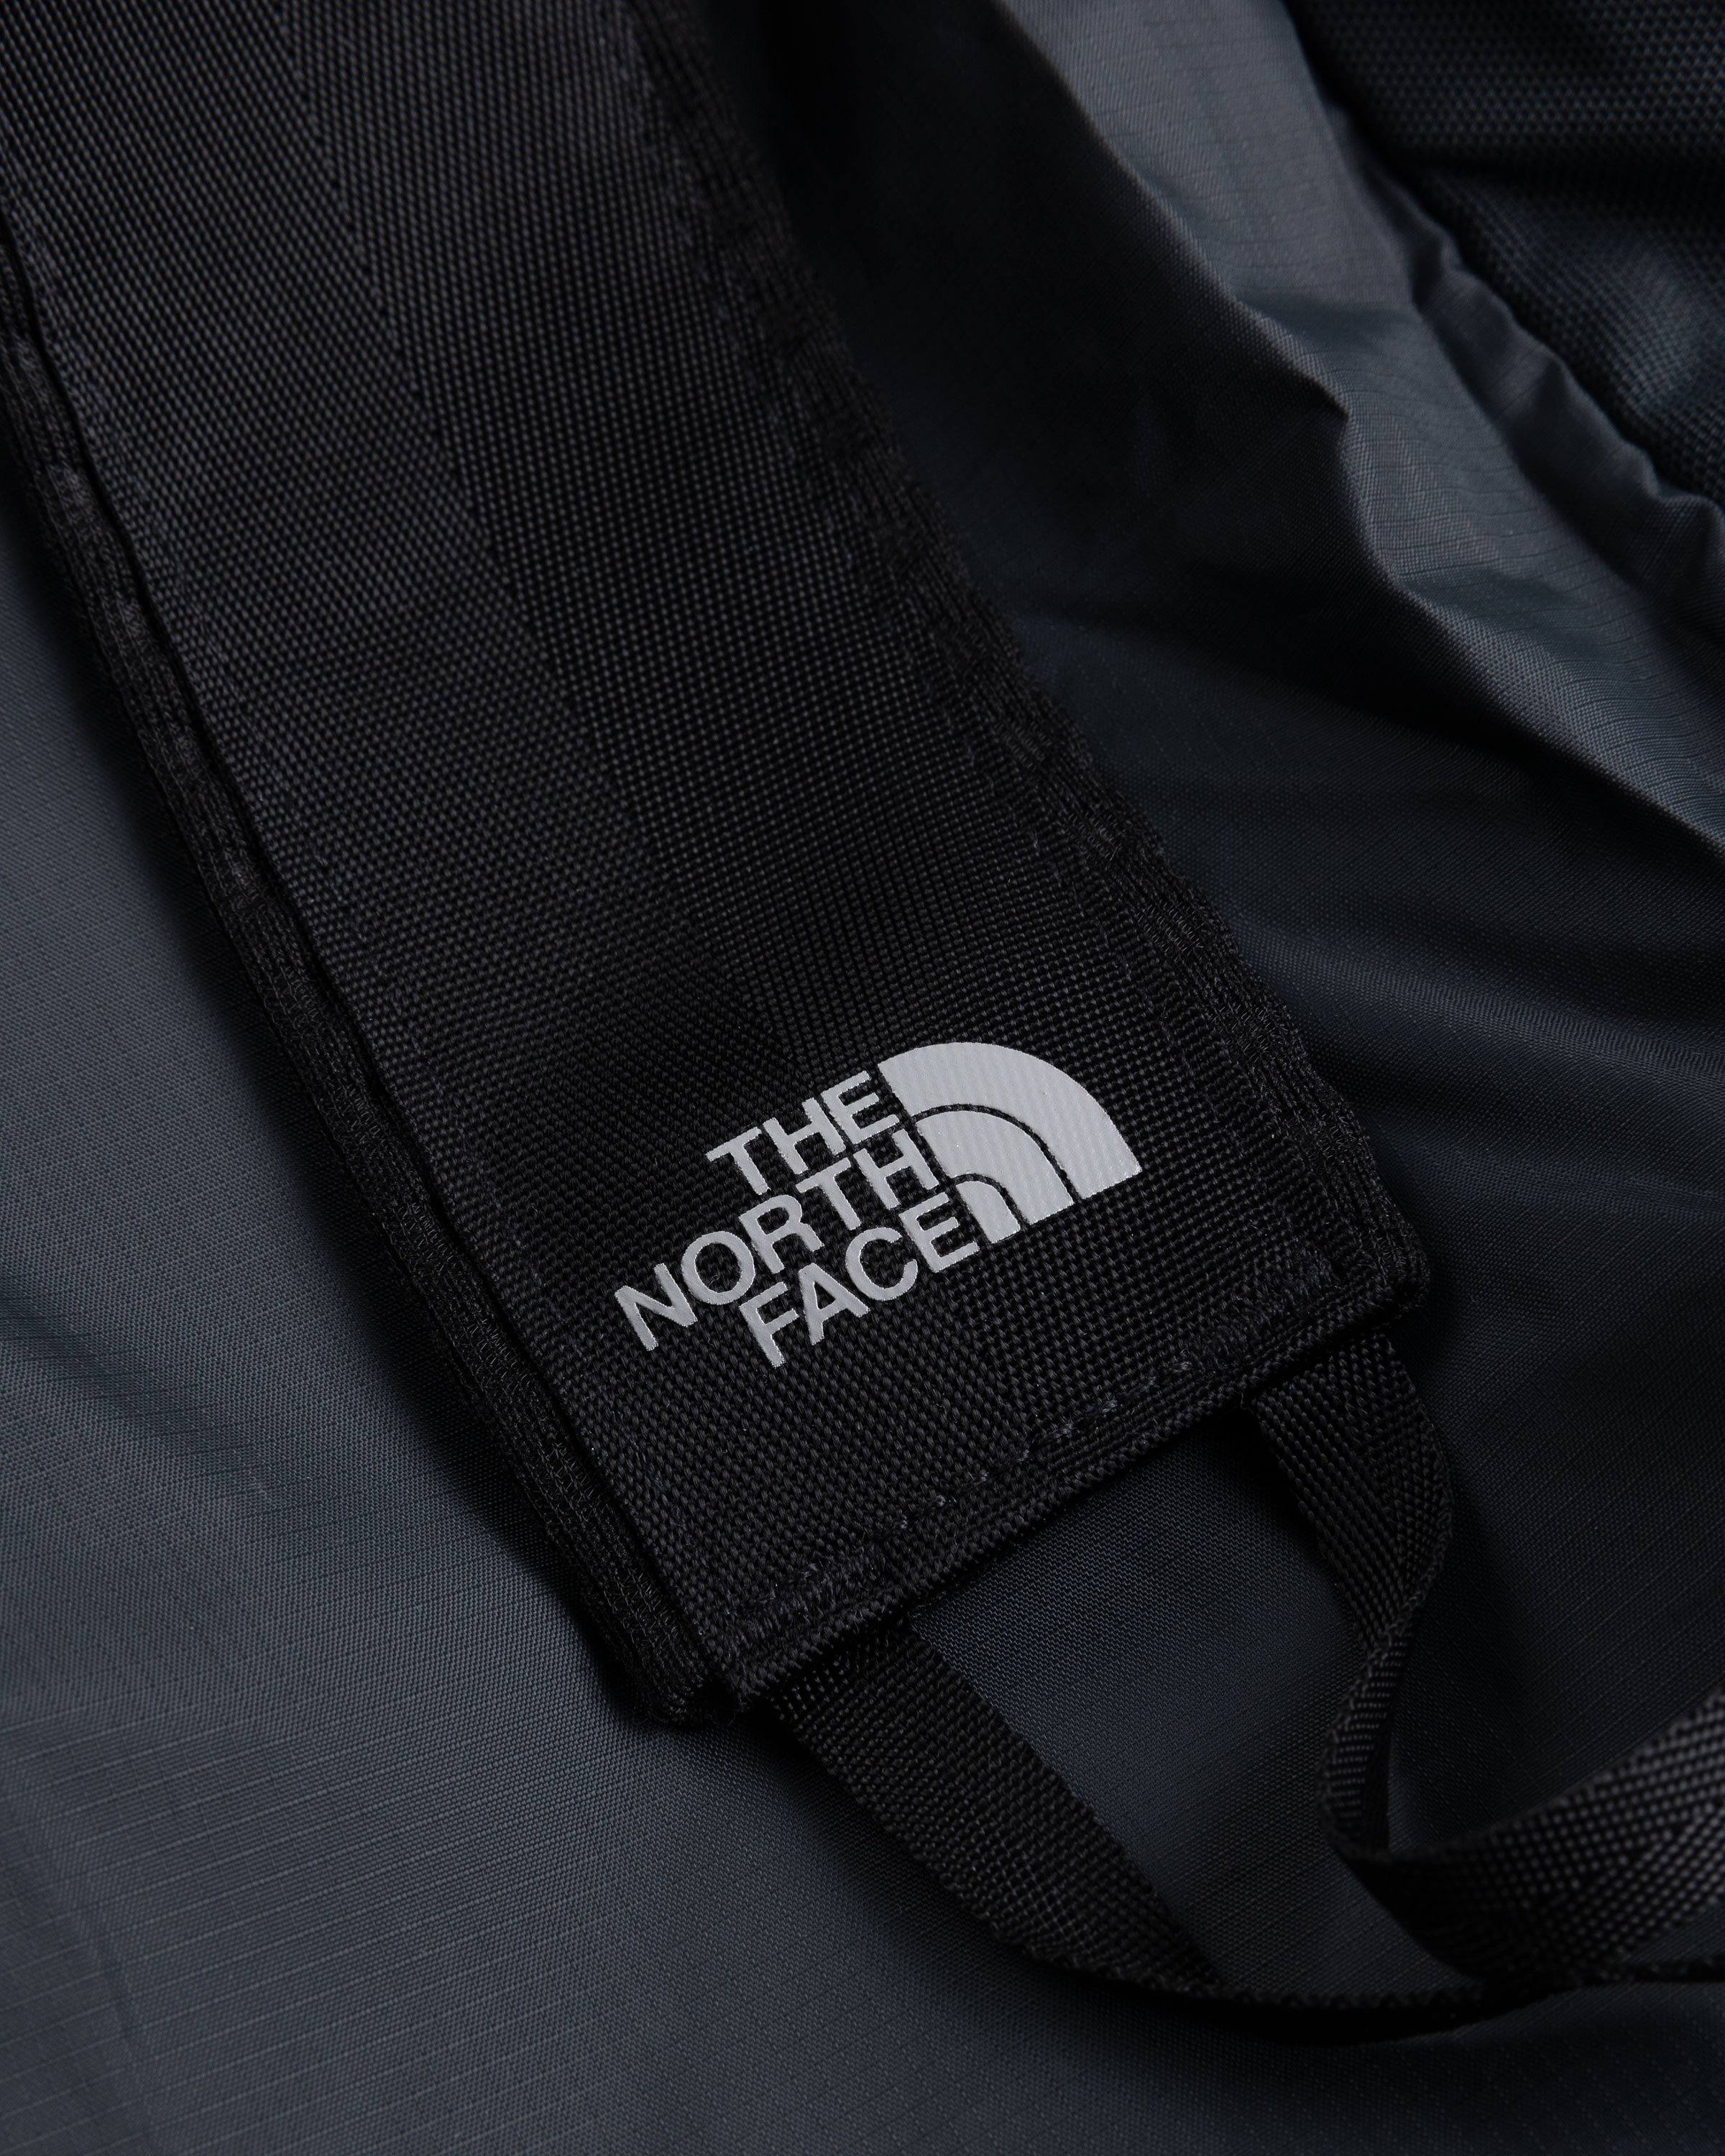 The North Face - Flyweight Daypack Asphalt Grey/TNF Black - Accessories - Grey - Image 5